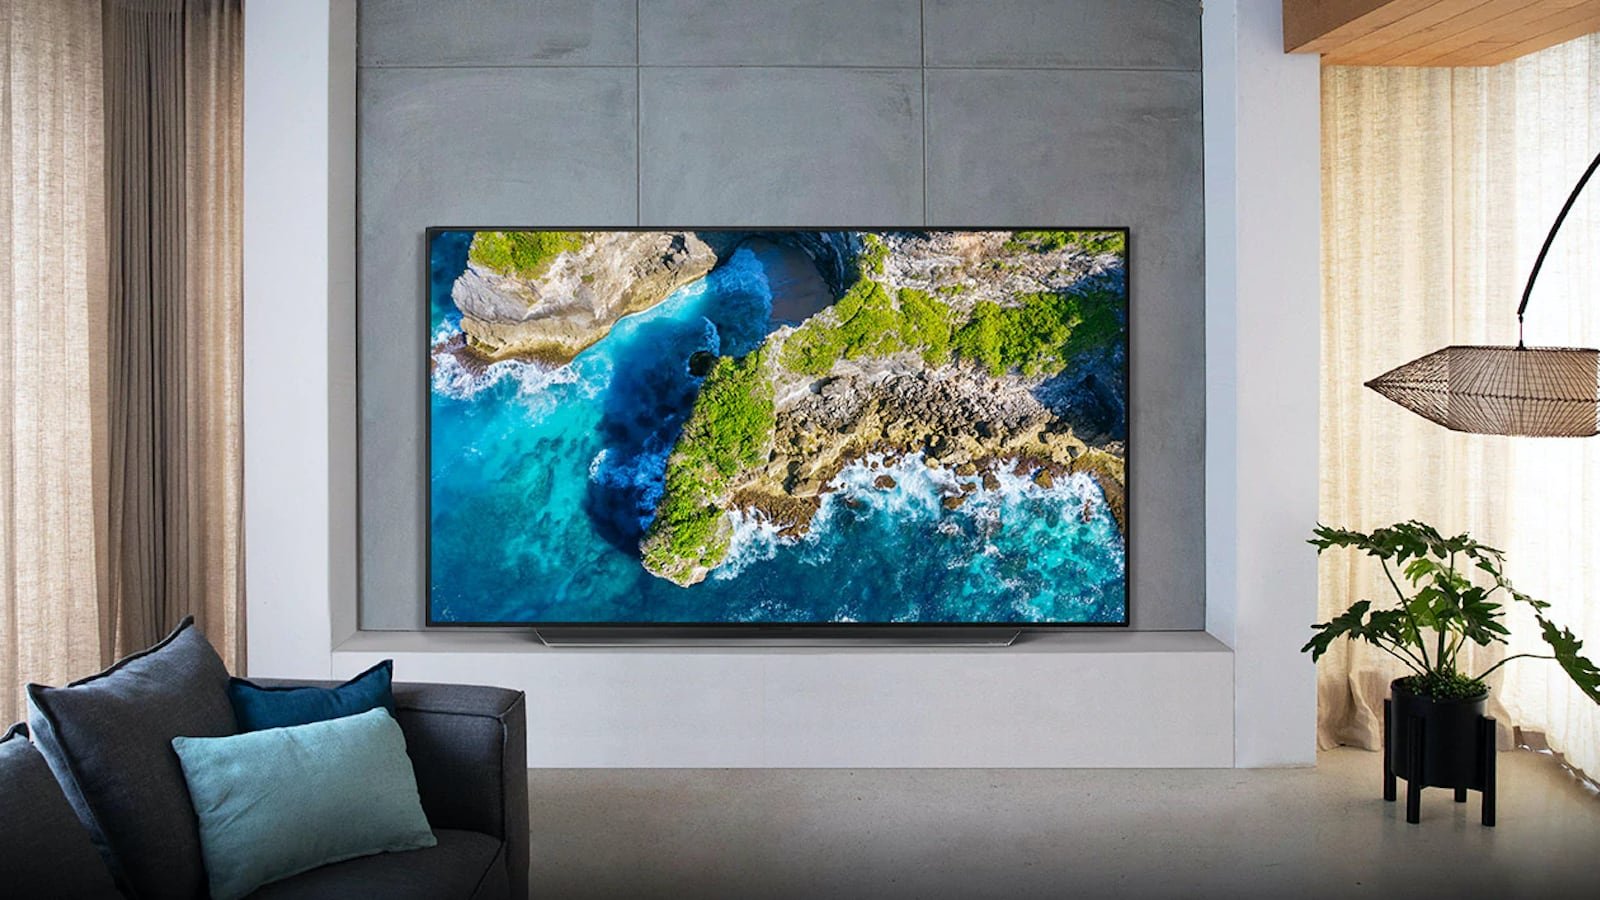 LG OLED 48CX 4K Ultra HD TV is a mid-size option for movies and gaming